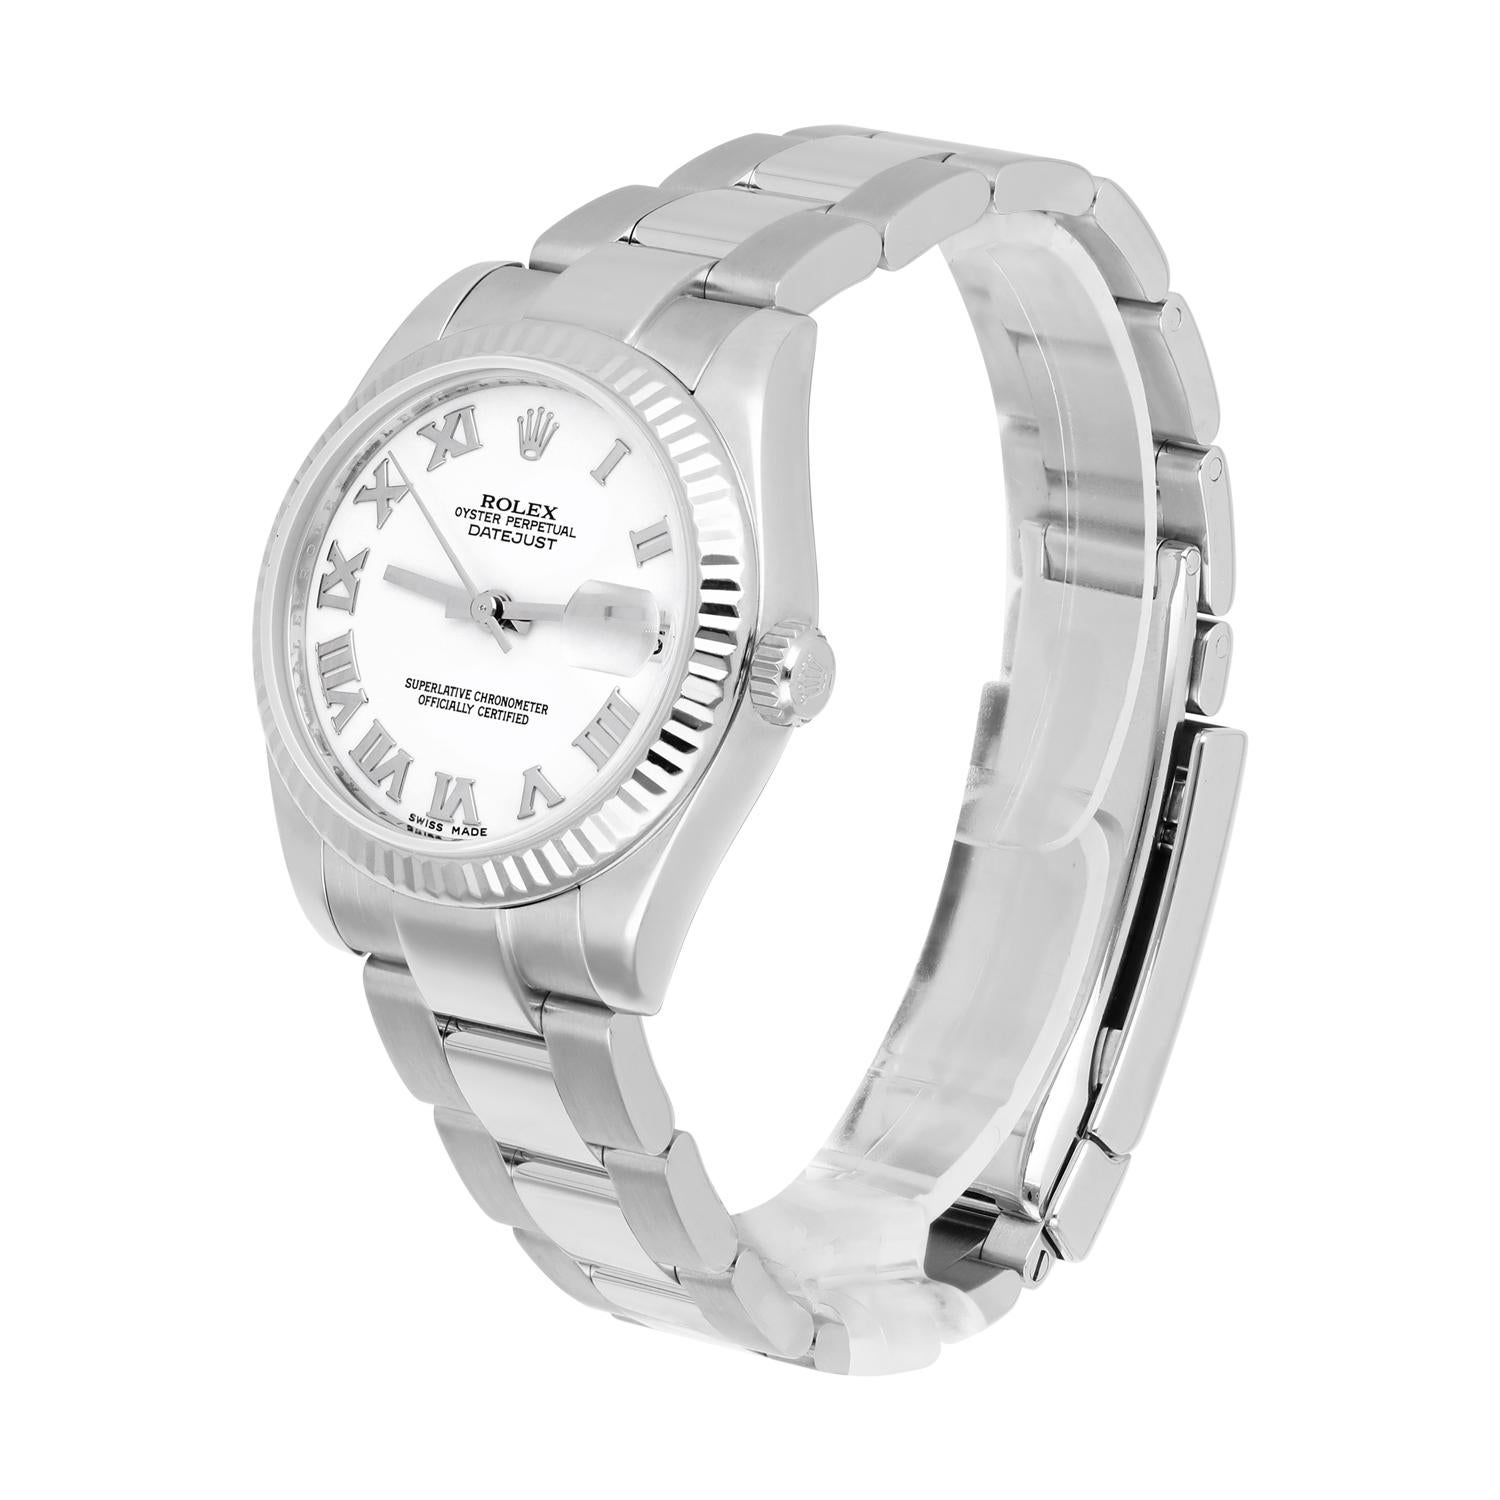 Rolex Lady-Datejust 31mm Stainless Steel White Roman Dial 178274 Oyster For Sale 2